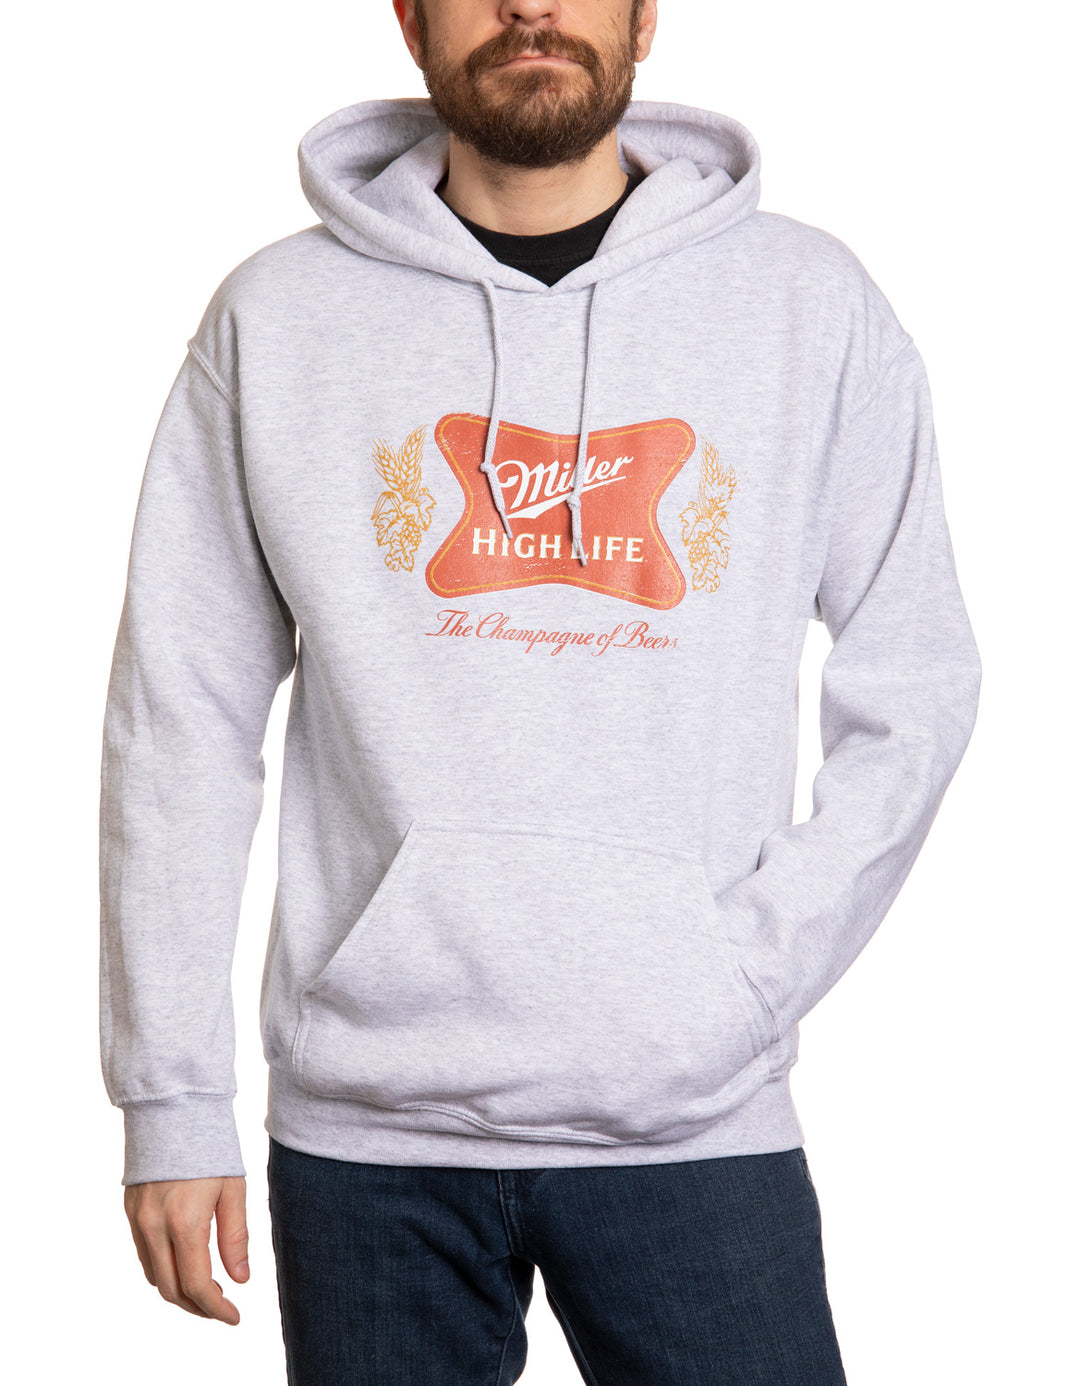 Miller High Life Label Pullover Hoodie